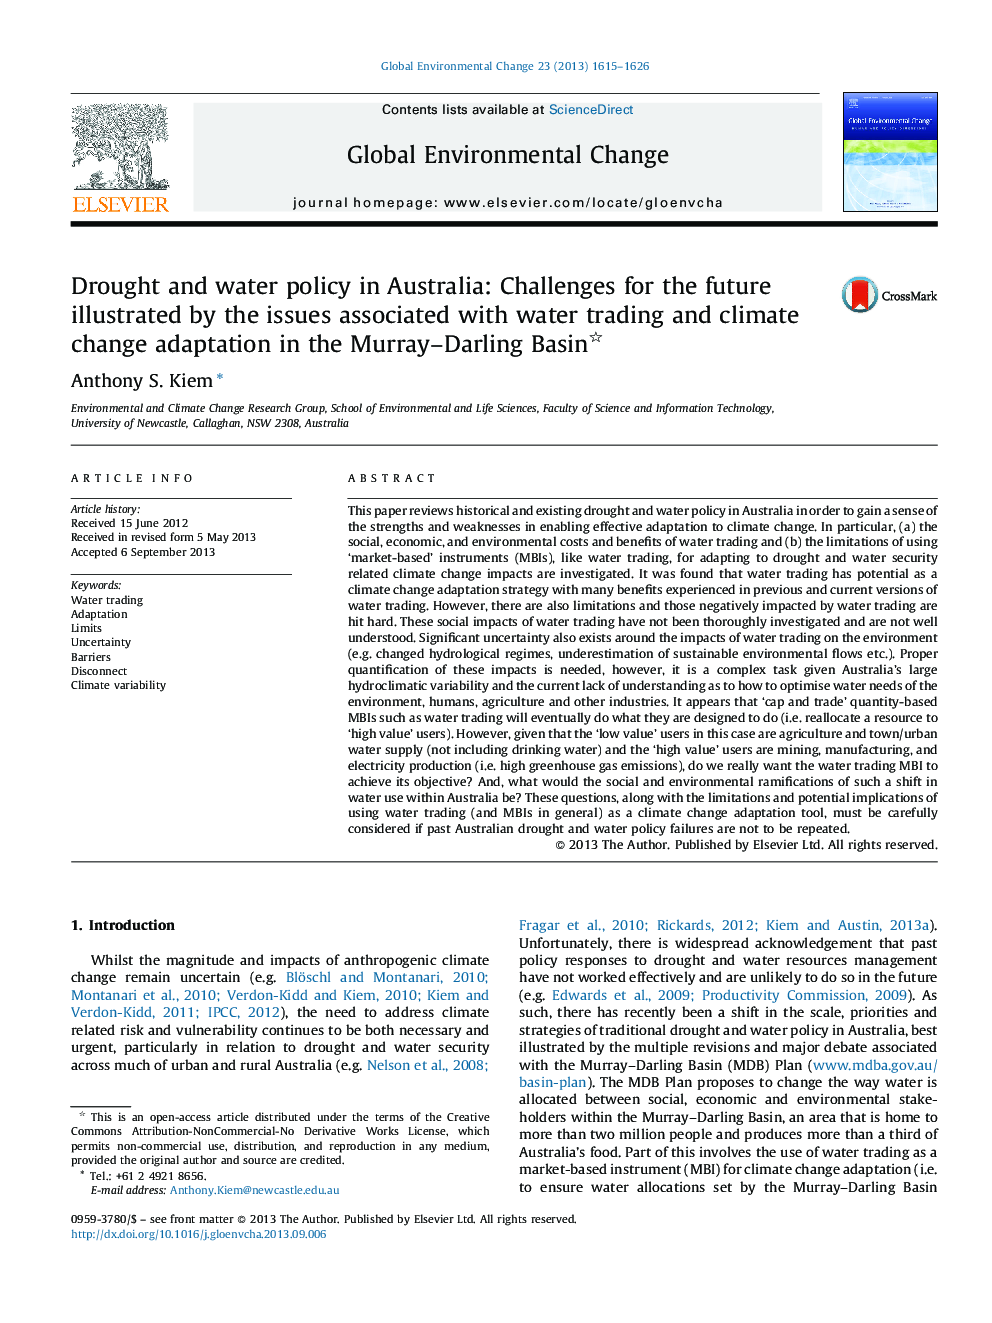 Drought and water policy in Australia: Challenges for the future illustrated by the issues associated with water trading and climate change adaptation in the Murray-Darling Basin